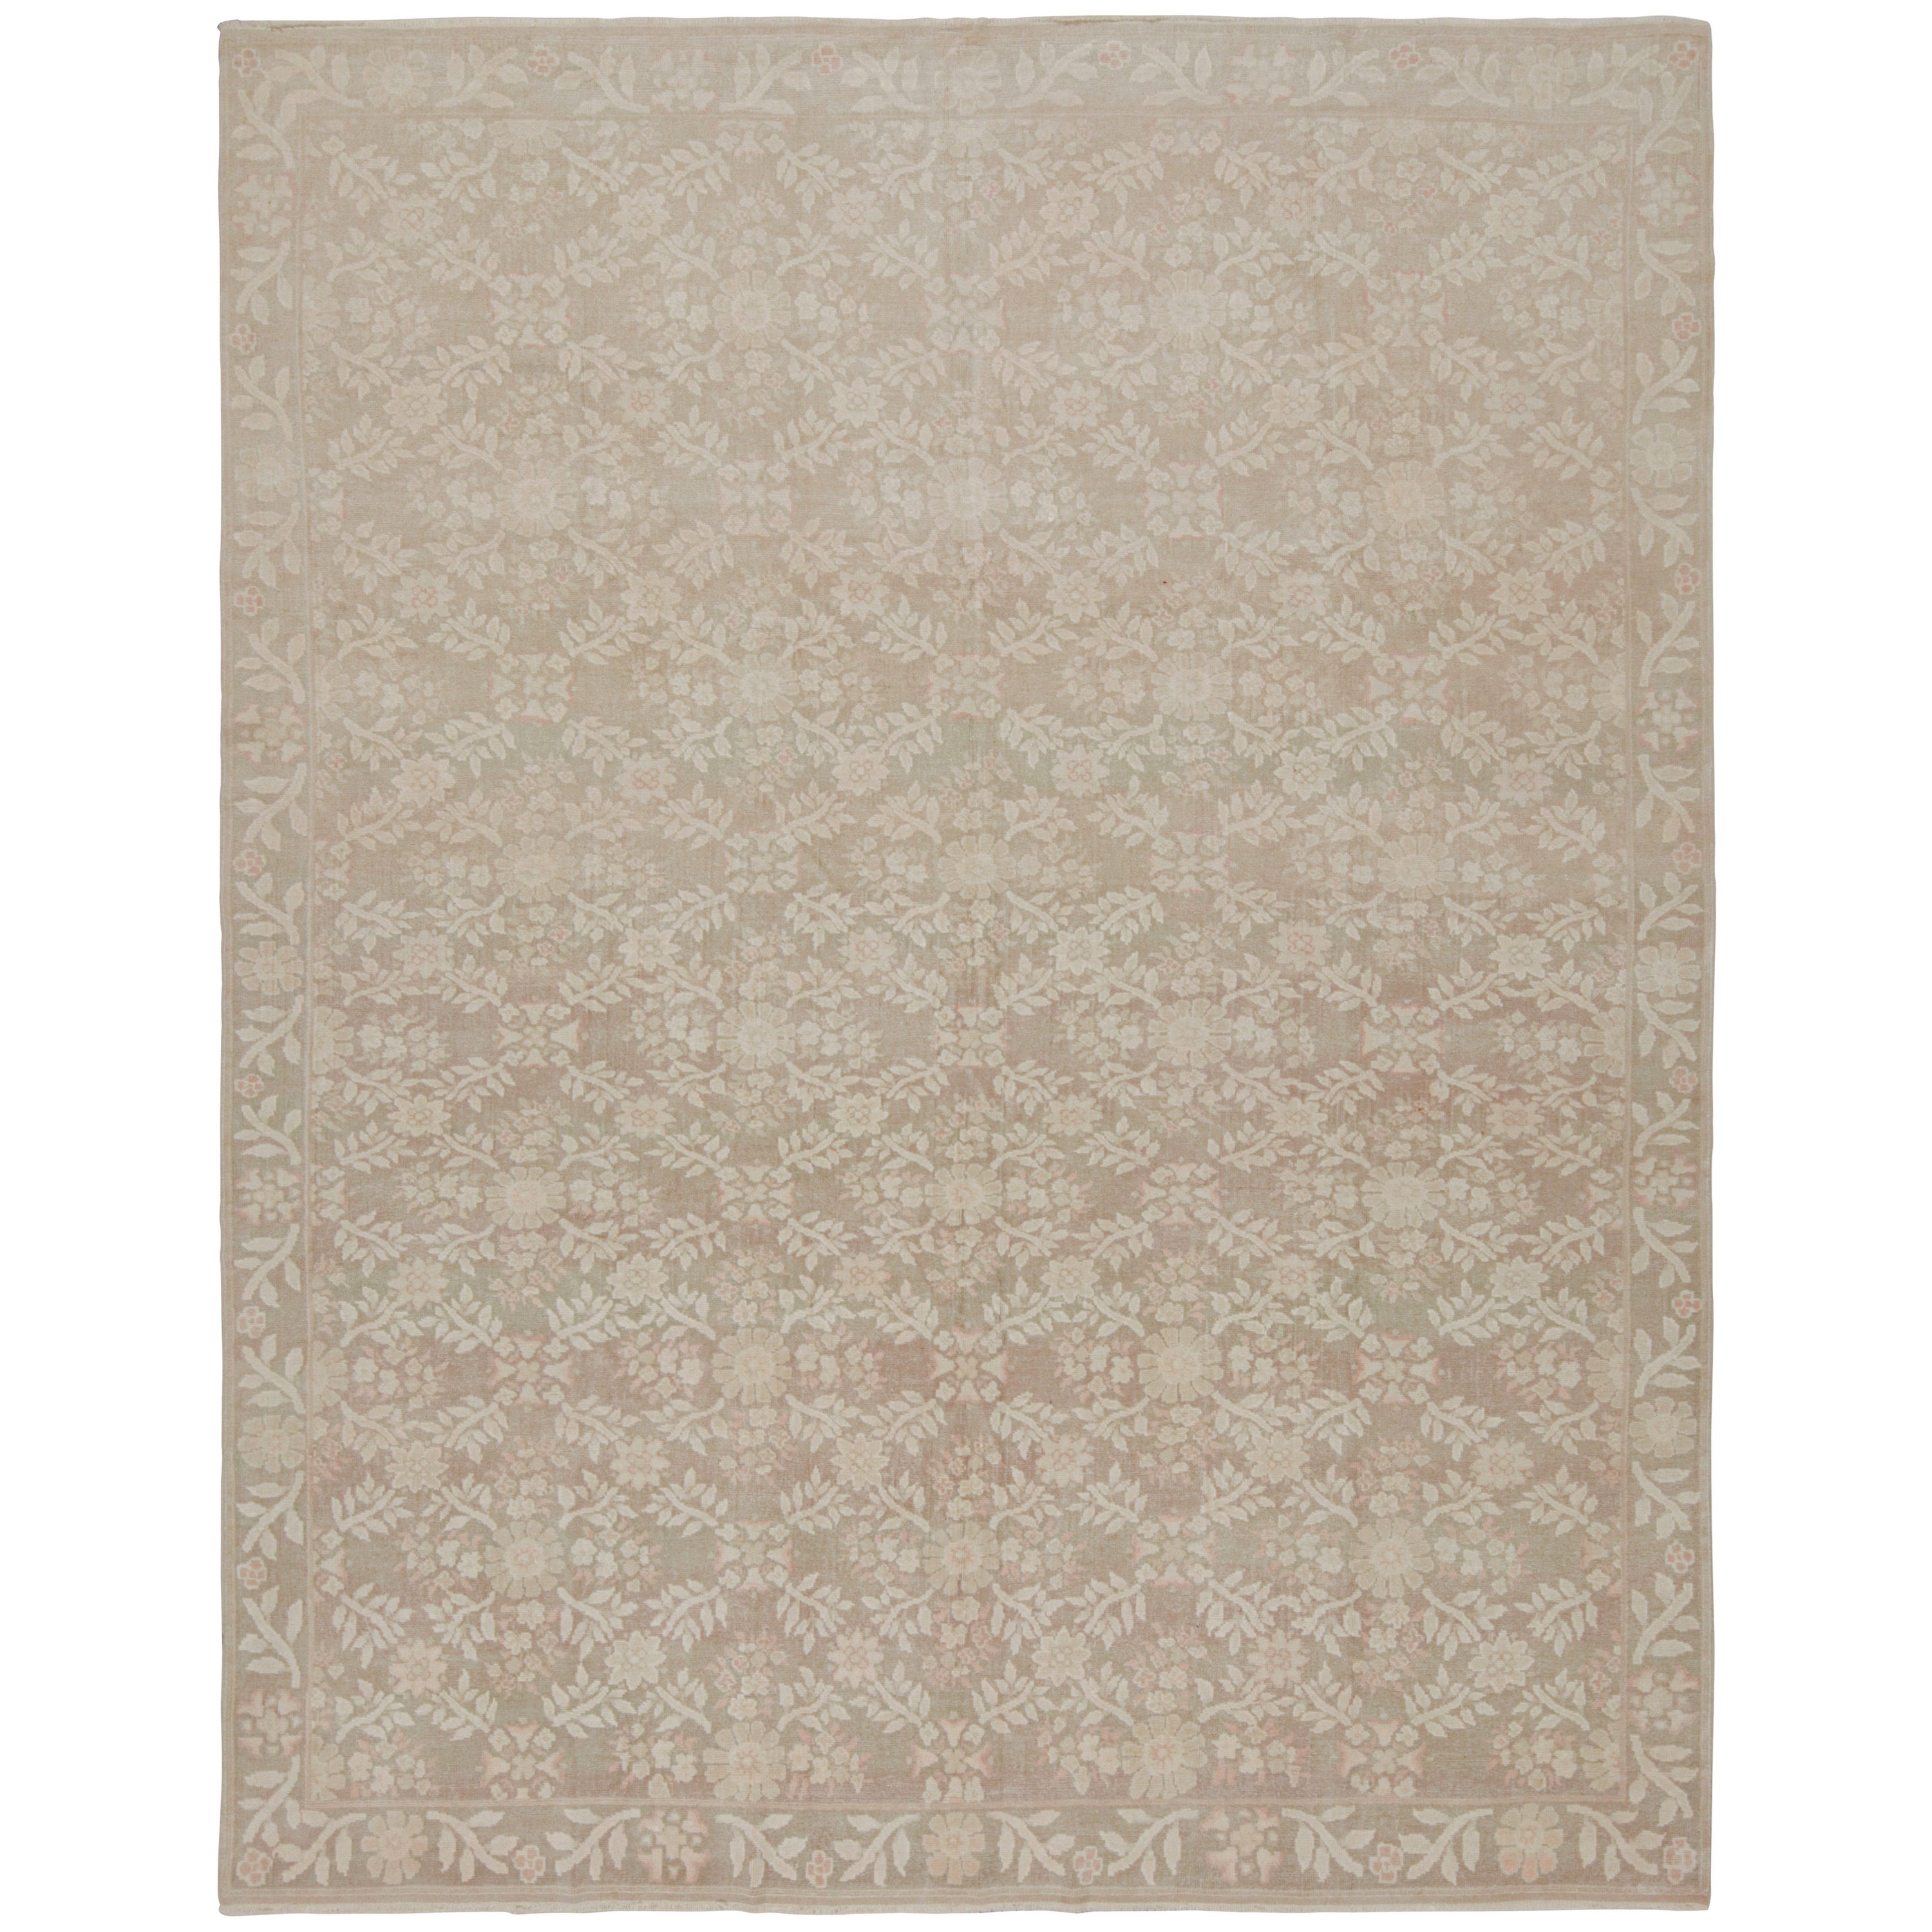 Rug & Kilim’s Contemporary European Style Rug in Beige with Floral Patterns 